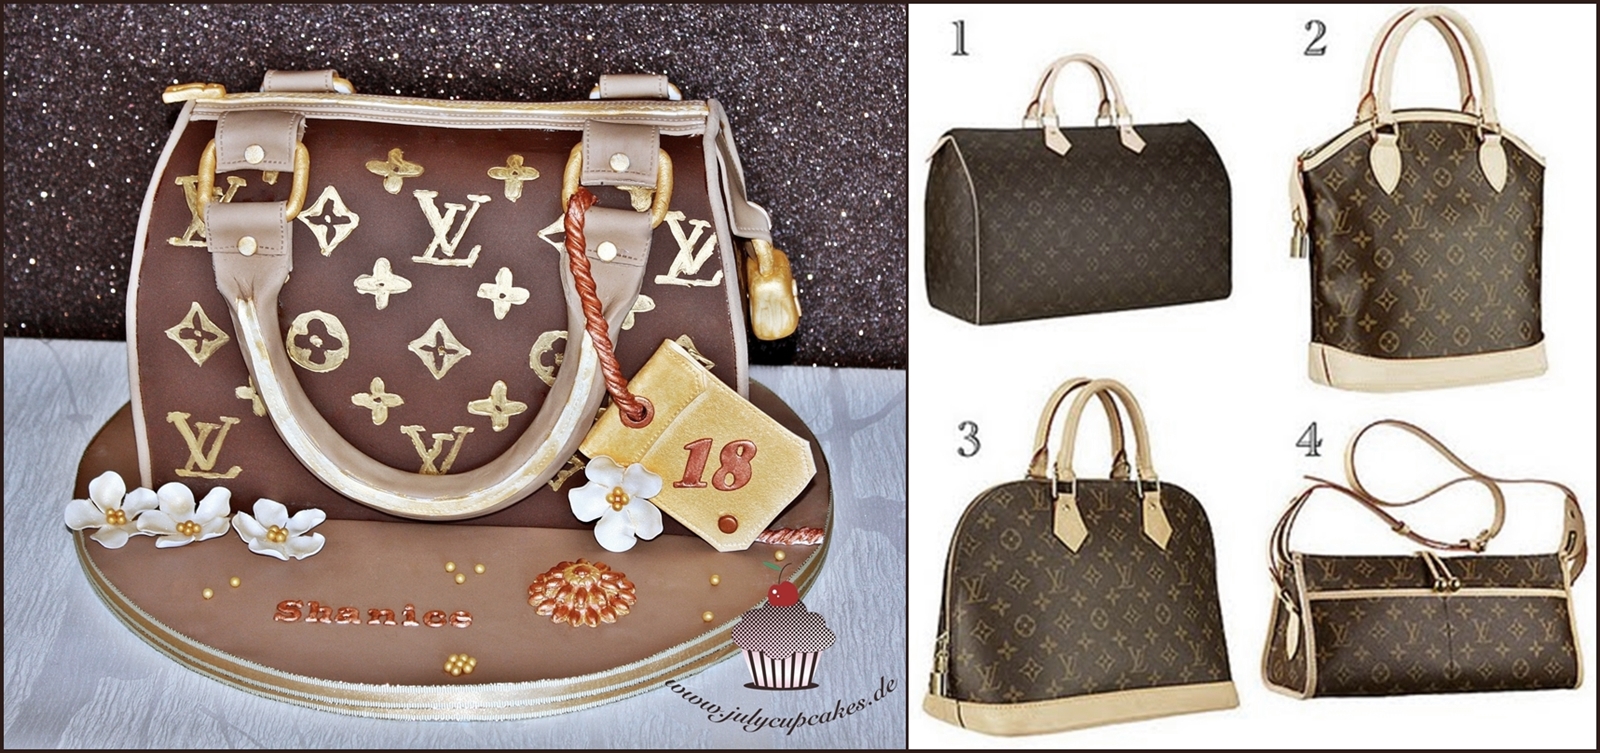 Louis Vuitton Handbag Cake Delivery Alabama | Confederated Tribes of the Umatilla Indian Reservation